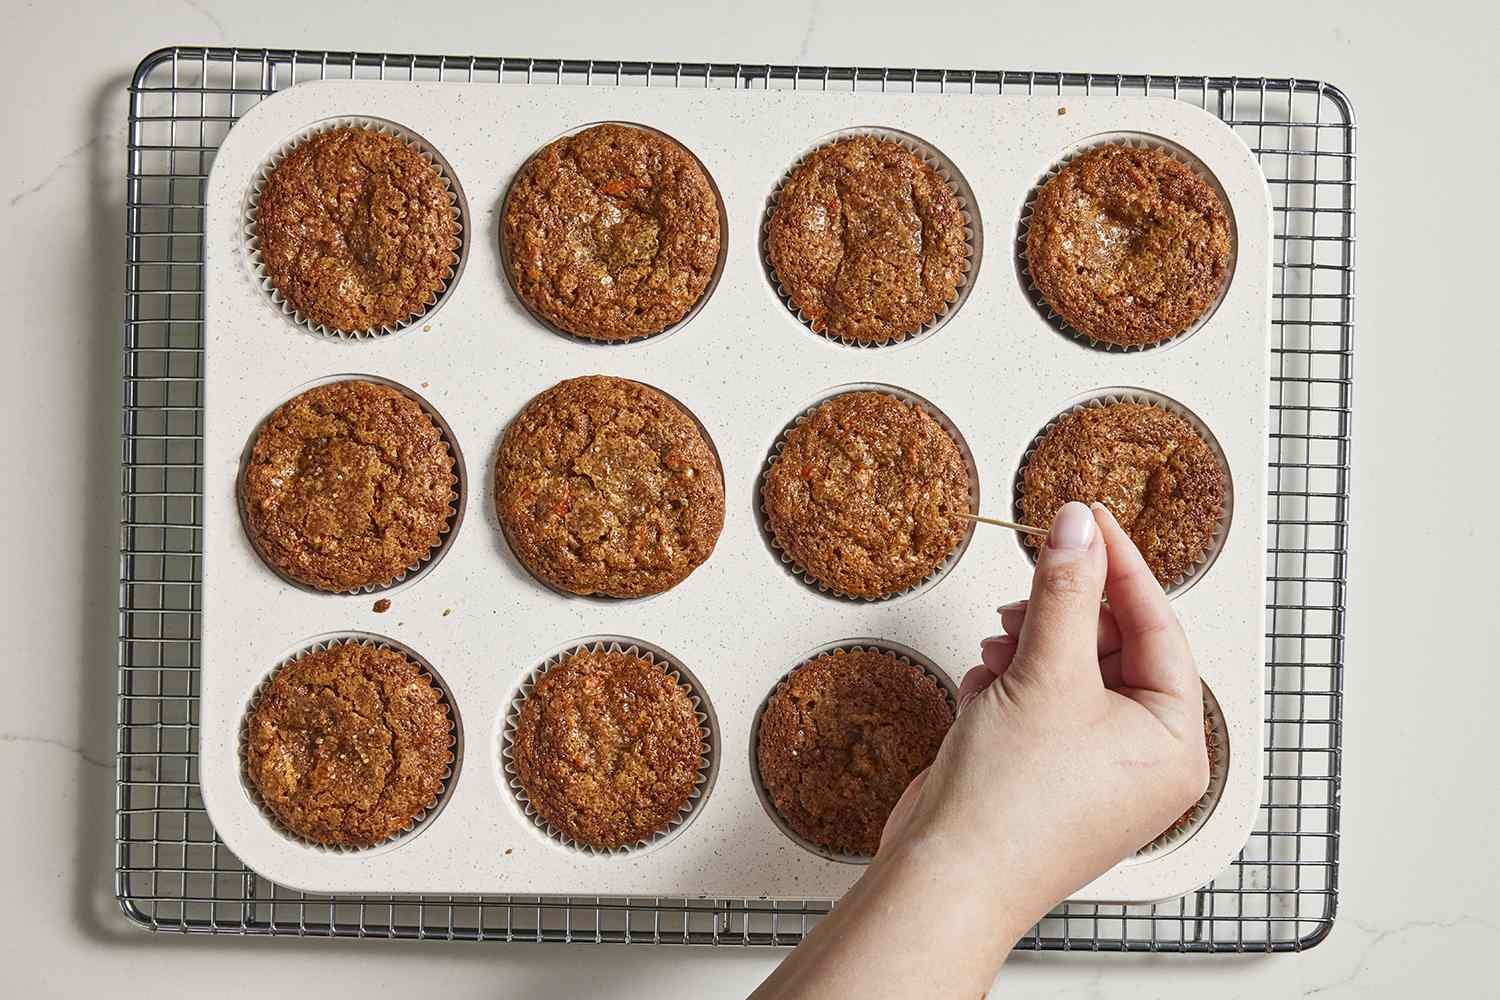 muffins from oven being tested with a toothpick